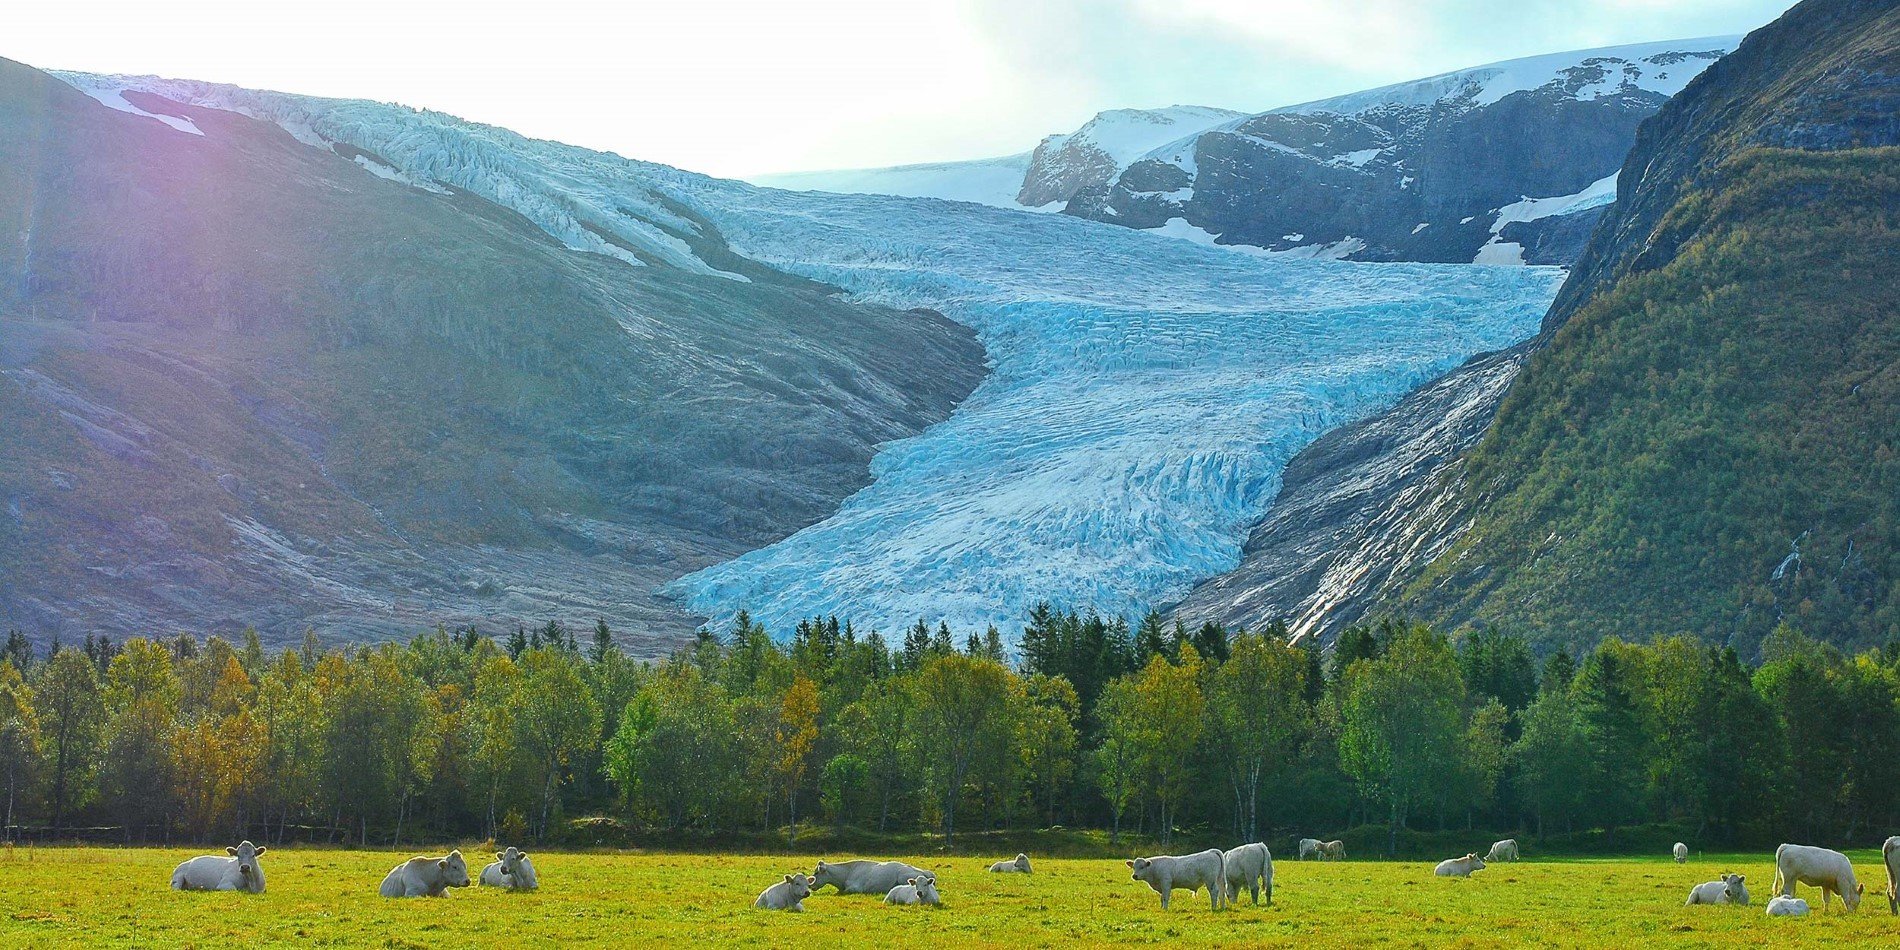 Svartisen – once the glacier streched over this field